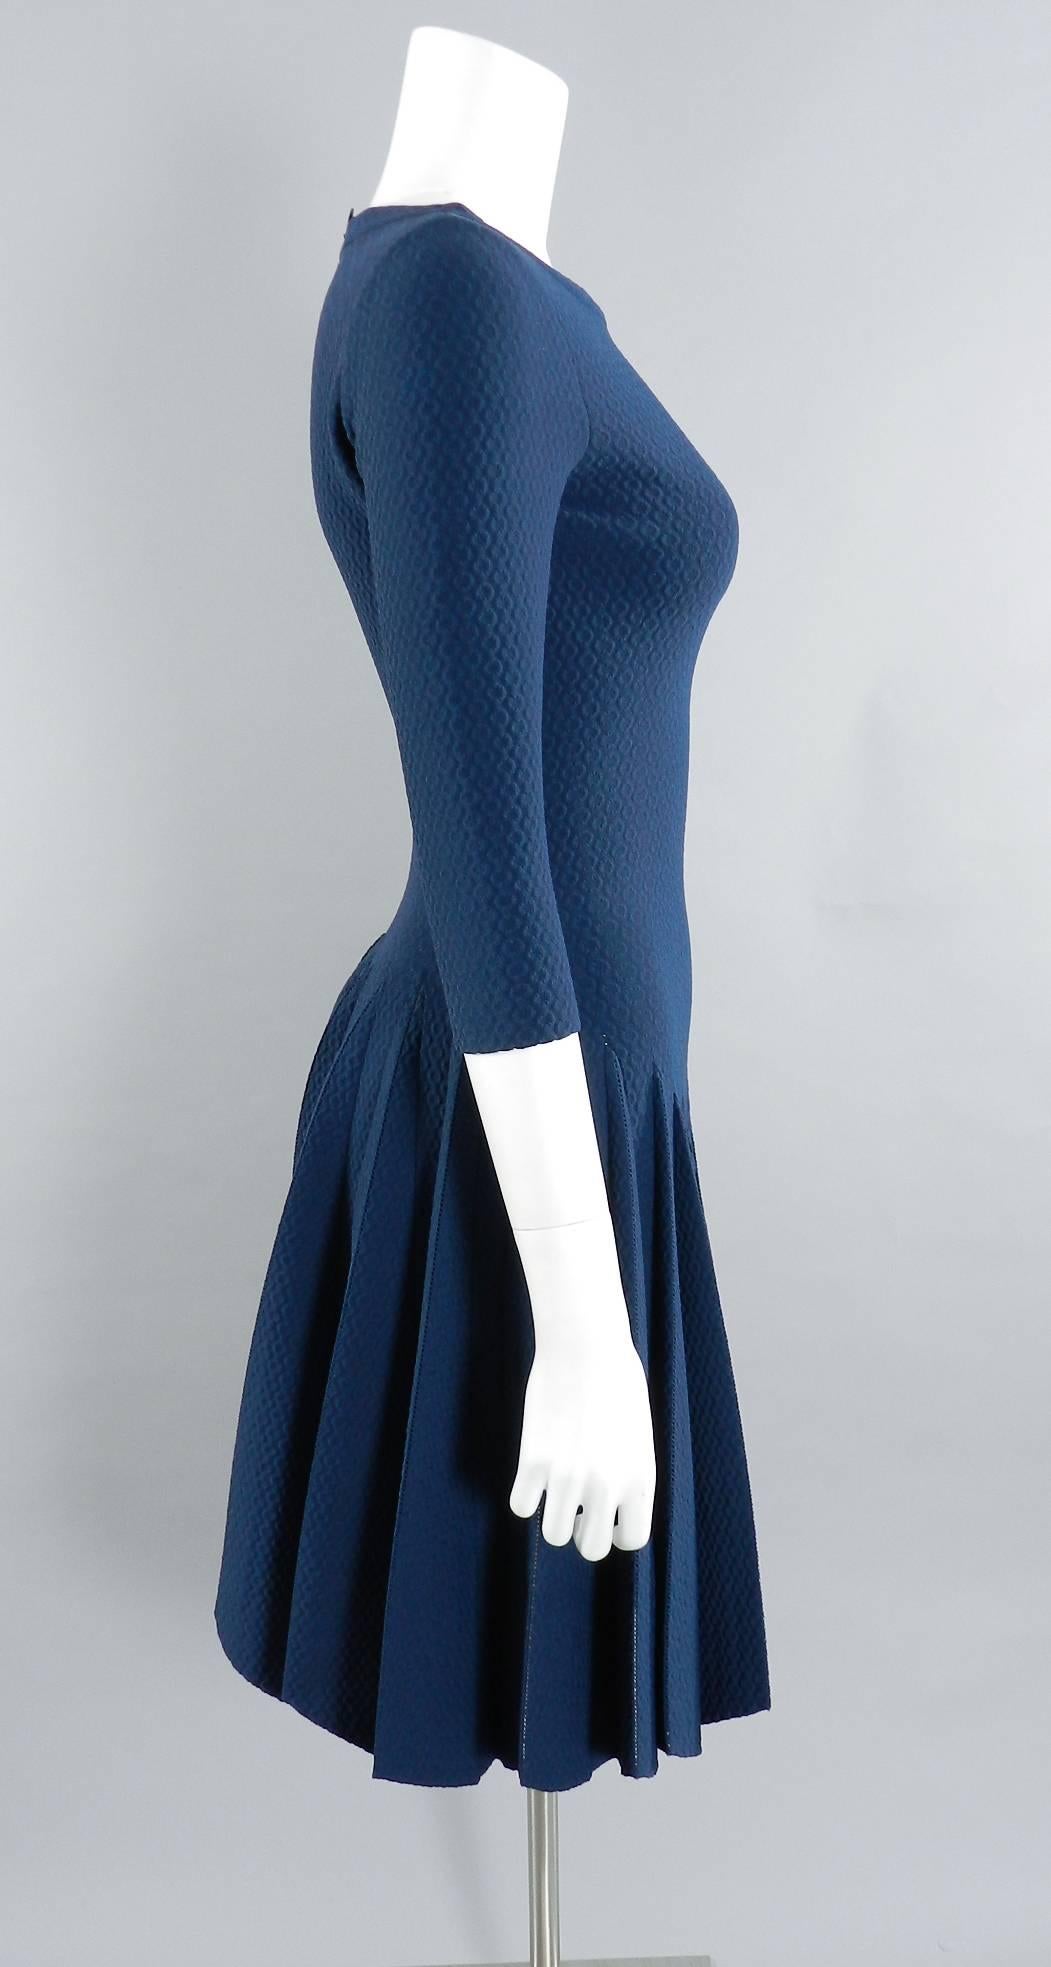 Azzedine Alaia prussian blue fit and flare knit jersey dress. Boatneck design with bracelet length sleeves and pleated skirt. Brand new with original retail price tag of $5795+ and never worn. Tagged size FR 38 (USA 6) but Alaia runs small and this